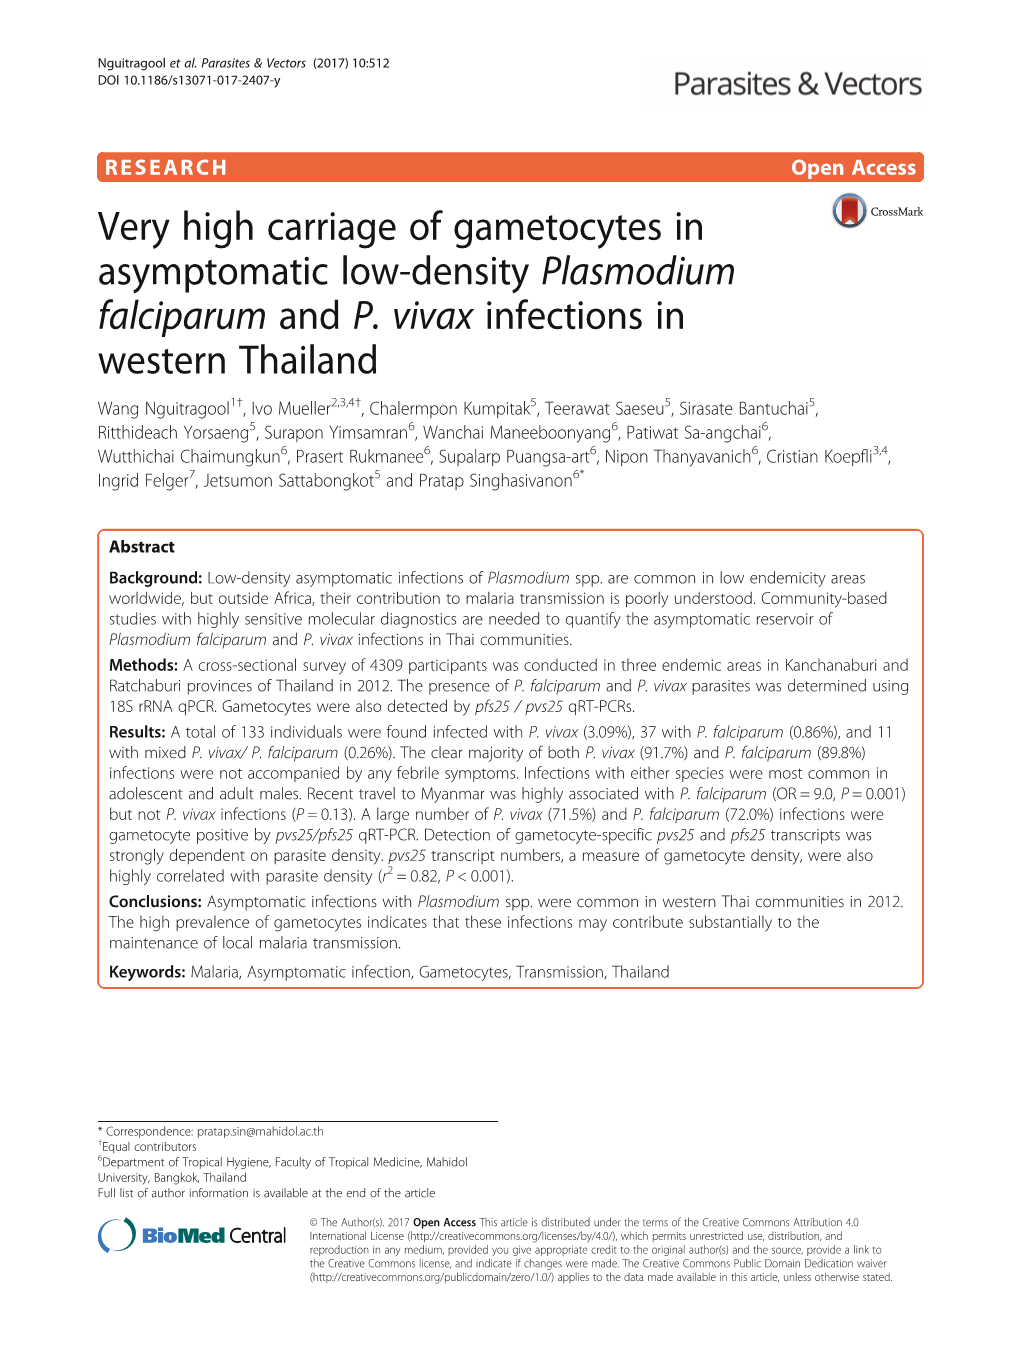 Very High Carriage of Gametocytes in Asymptomatic Low-Density Plasmodium Falciparum and P